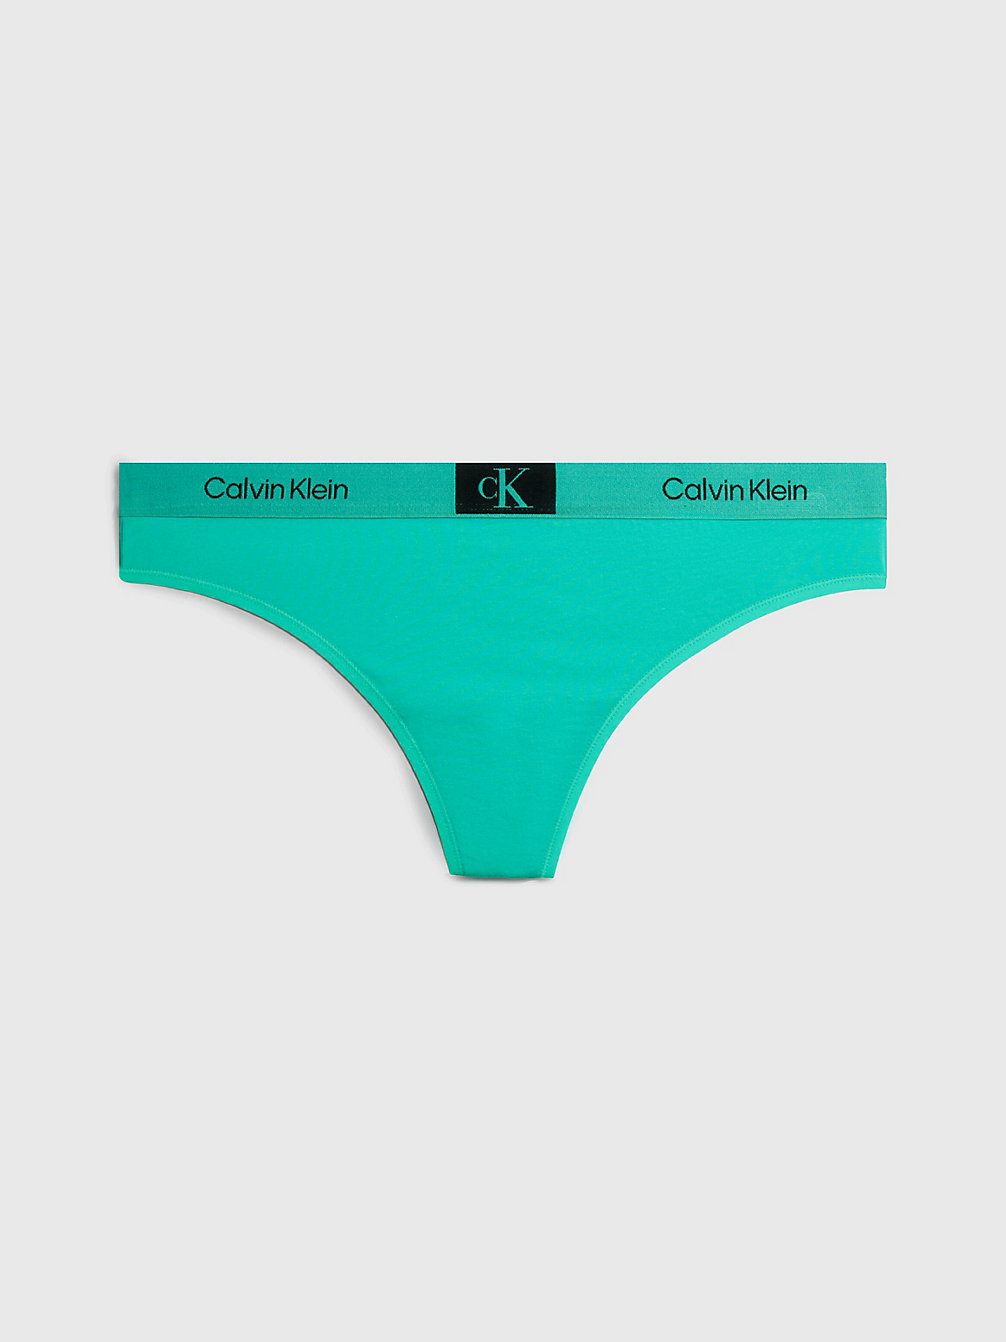 FRESH PEPPERMINT > Grote Maat String - Ck96 > undefined dames - Calvin Klein